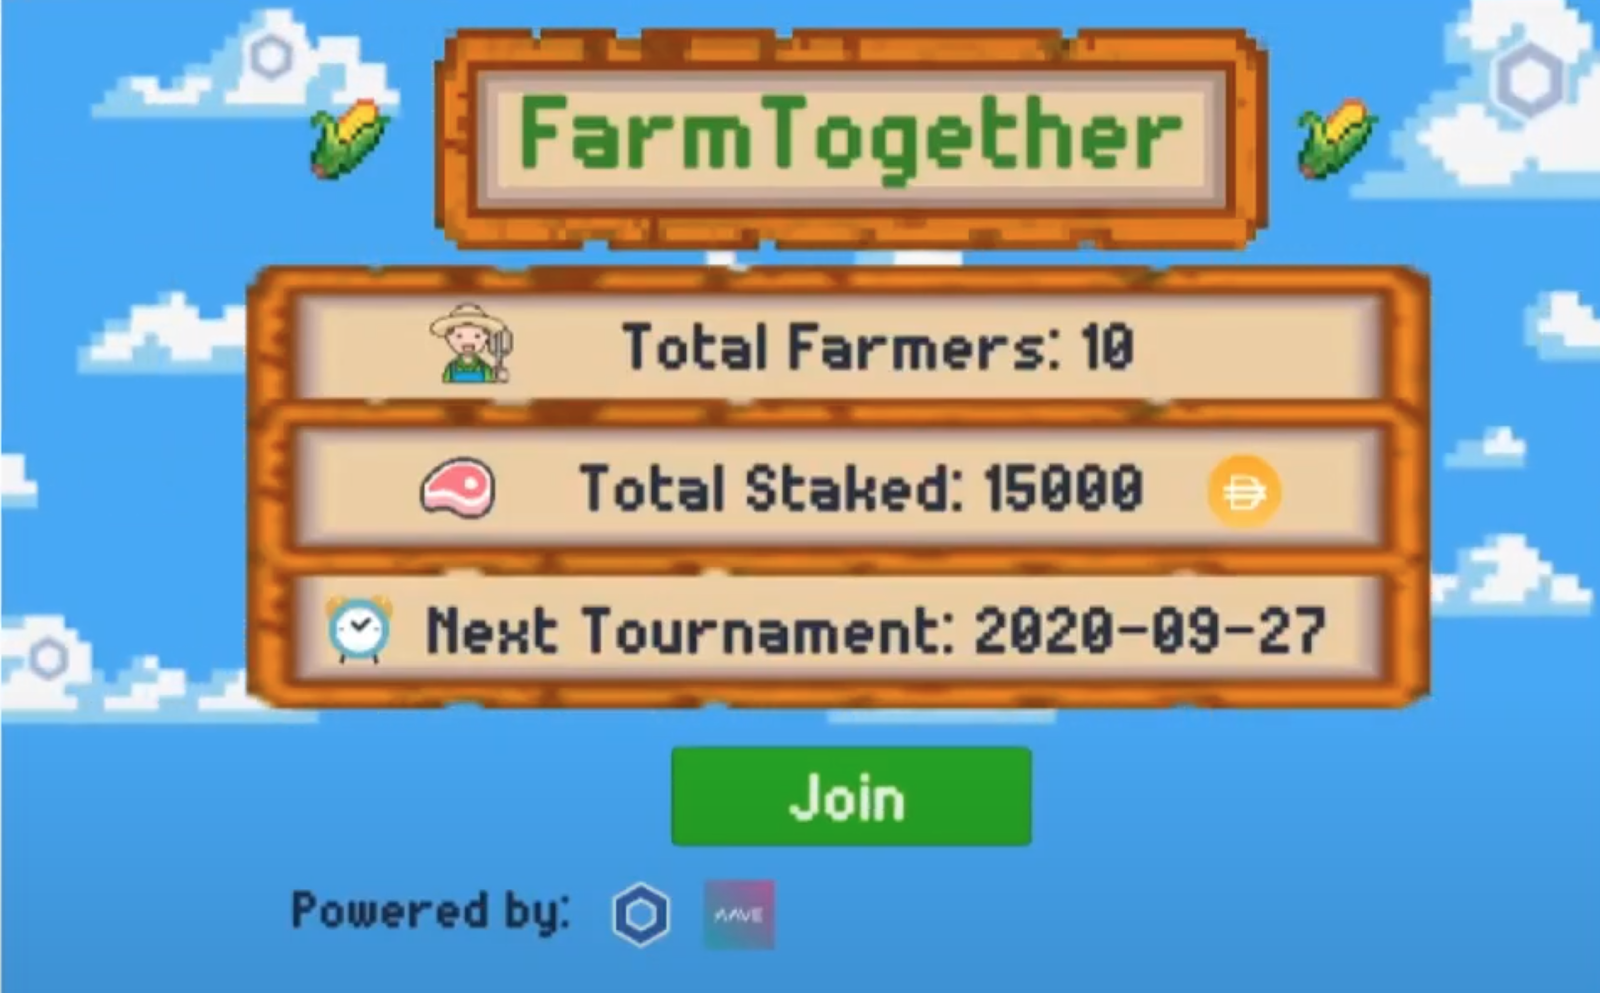 FarmTogether User Interface, Best Gaming/NFT Project from the 2020 Chainlink Virtual Hackathon